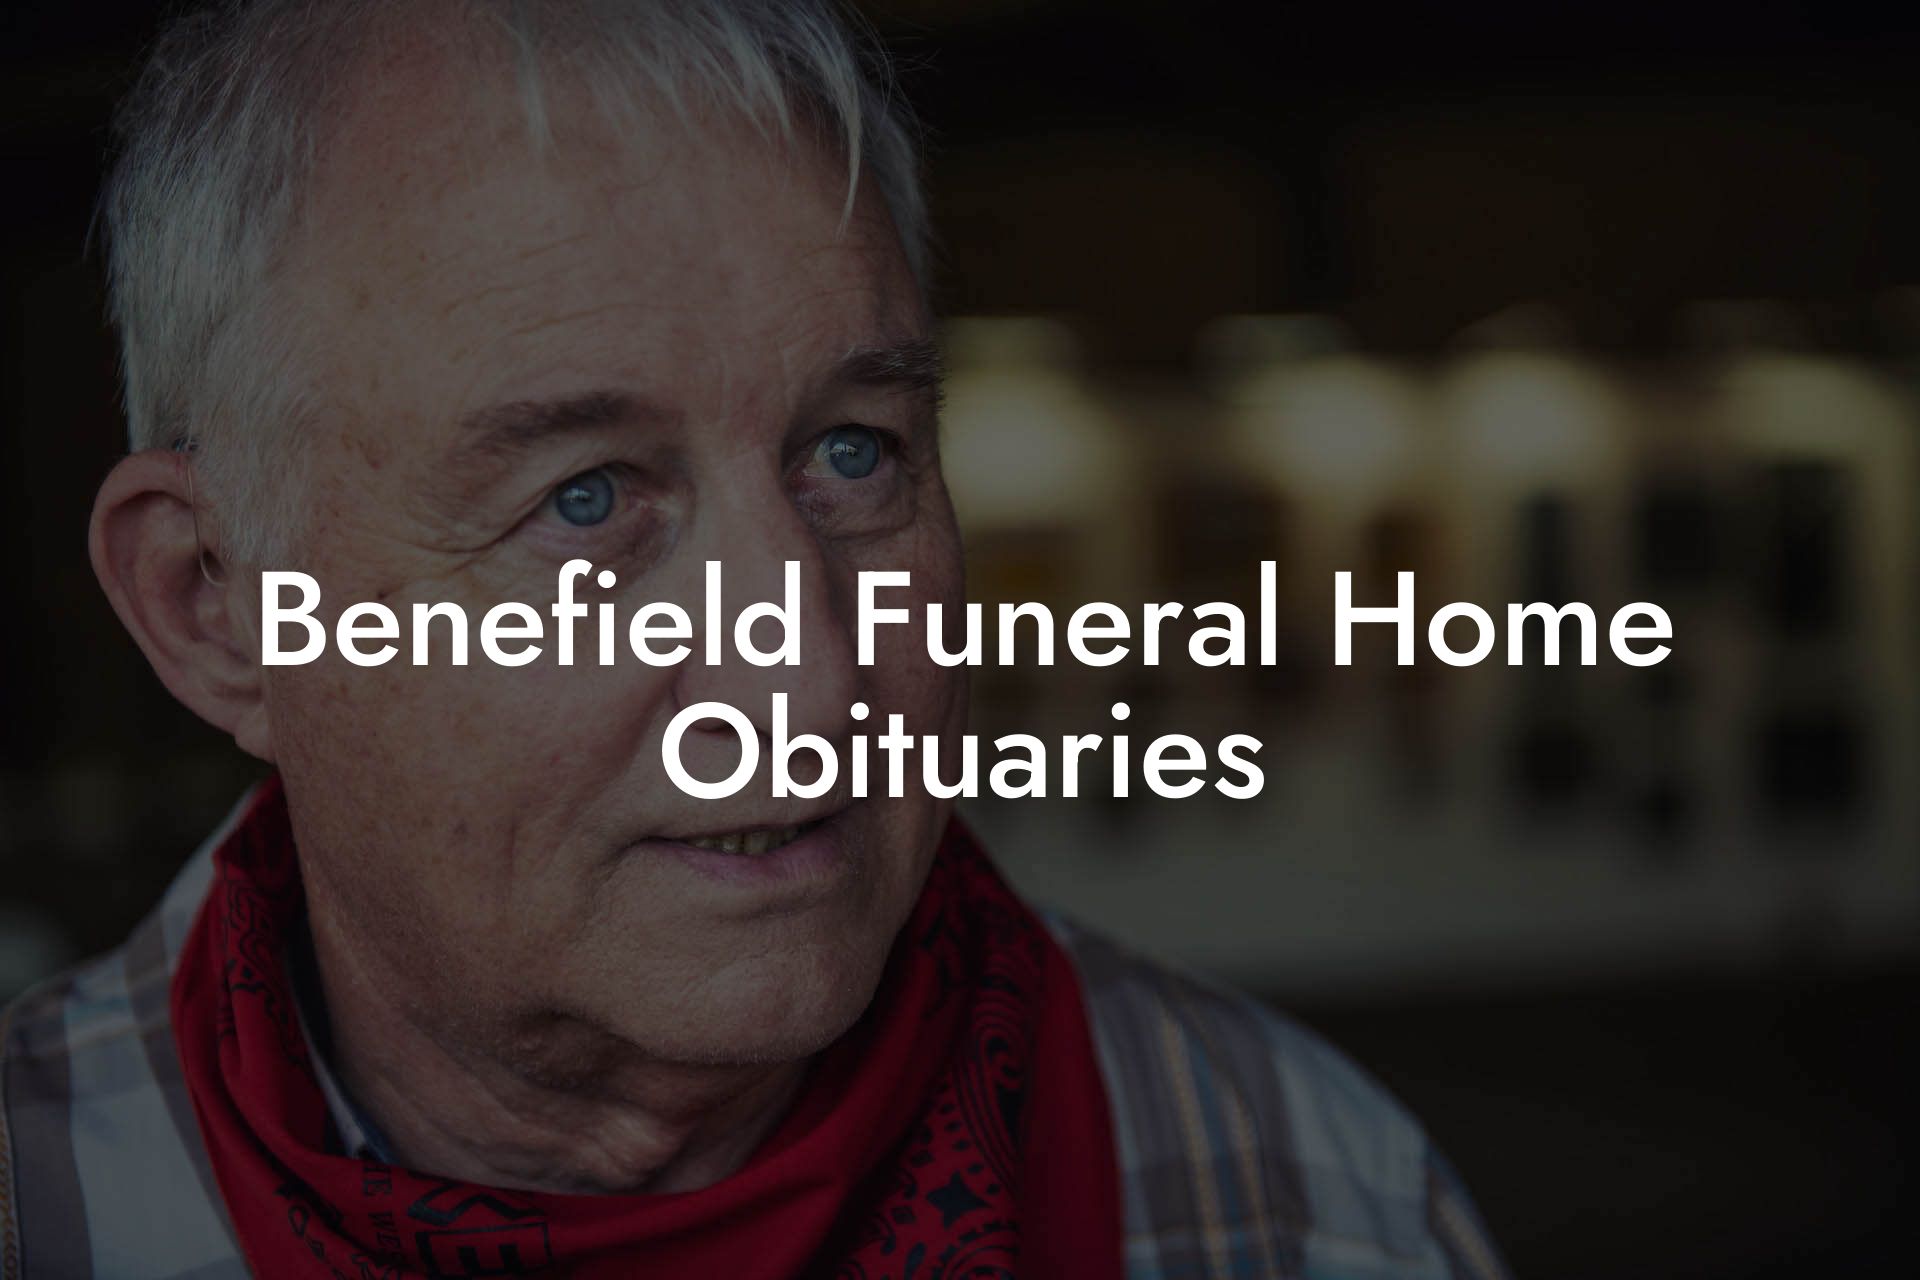 Benefield Funeral Home Obituaries